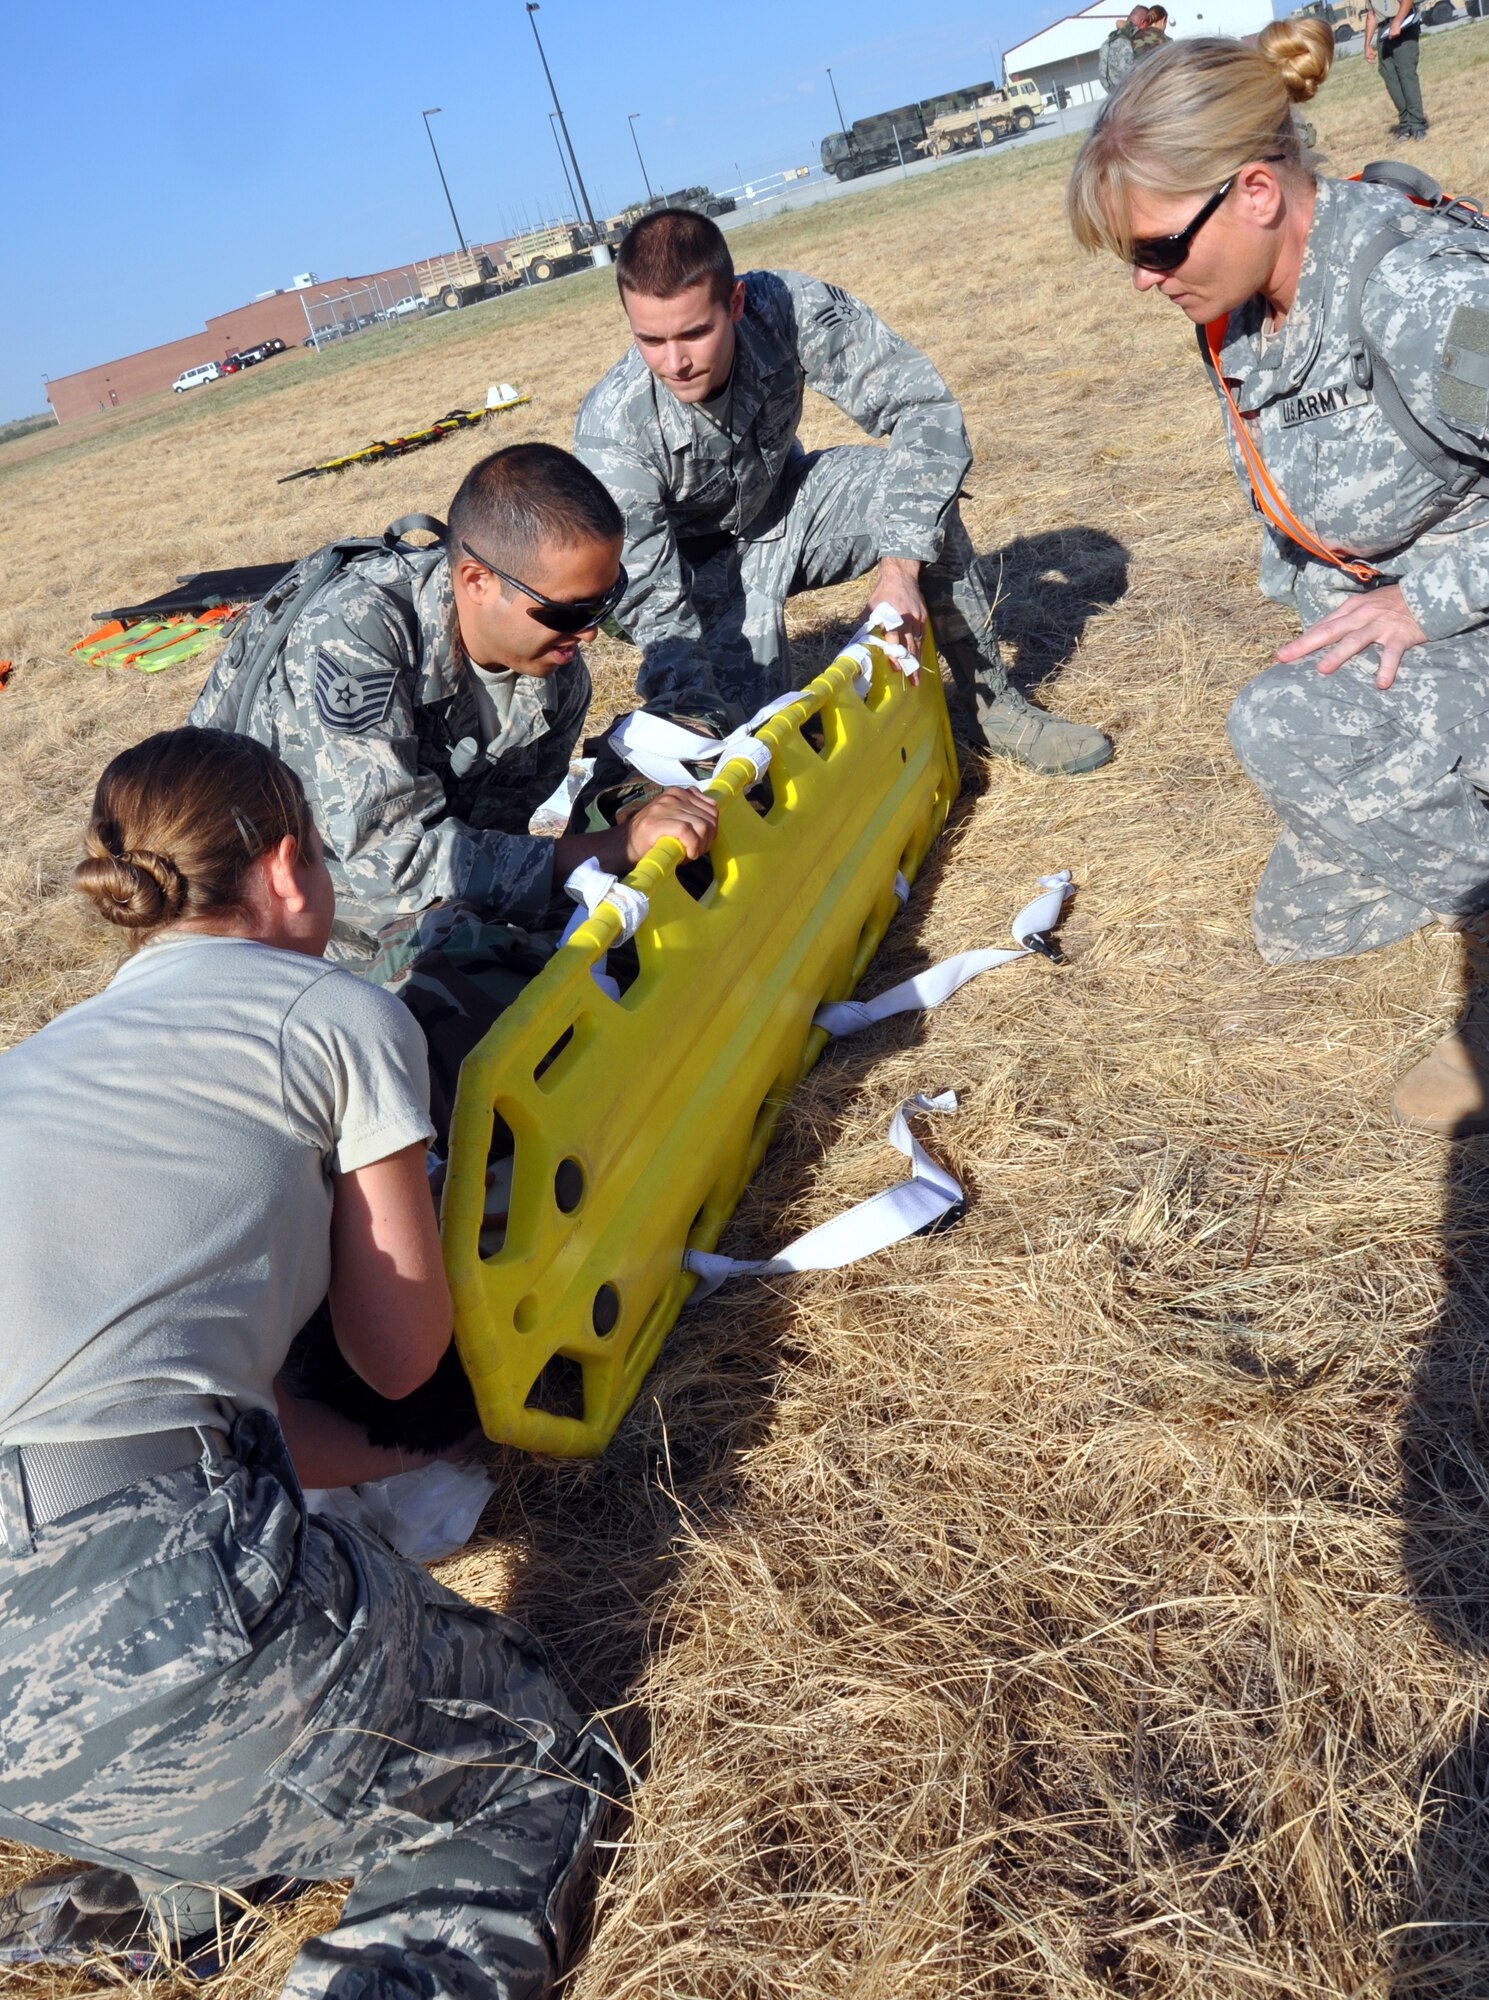 Air Force personnel from the 301st Medical Squadron work quickly to secure a simulated casualty and carry litter while observed by an Army medical evaluator during the second day of the joint Mass Casualty Exercise held at the Army Reserve Center, Fort Worth, September 10 and 11. Medical personnel from the 301st MDS, Army, Navy and civilian emergency responders participated in the exercise. The two-day exercise pulled together military and civilian units and emergency responders from around the area was designed to sharpen the operational skills and procedures of the organizations during joint operations.  (U.S. Air Force photo/Staff Sgt Chris Bolen)